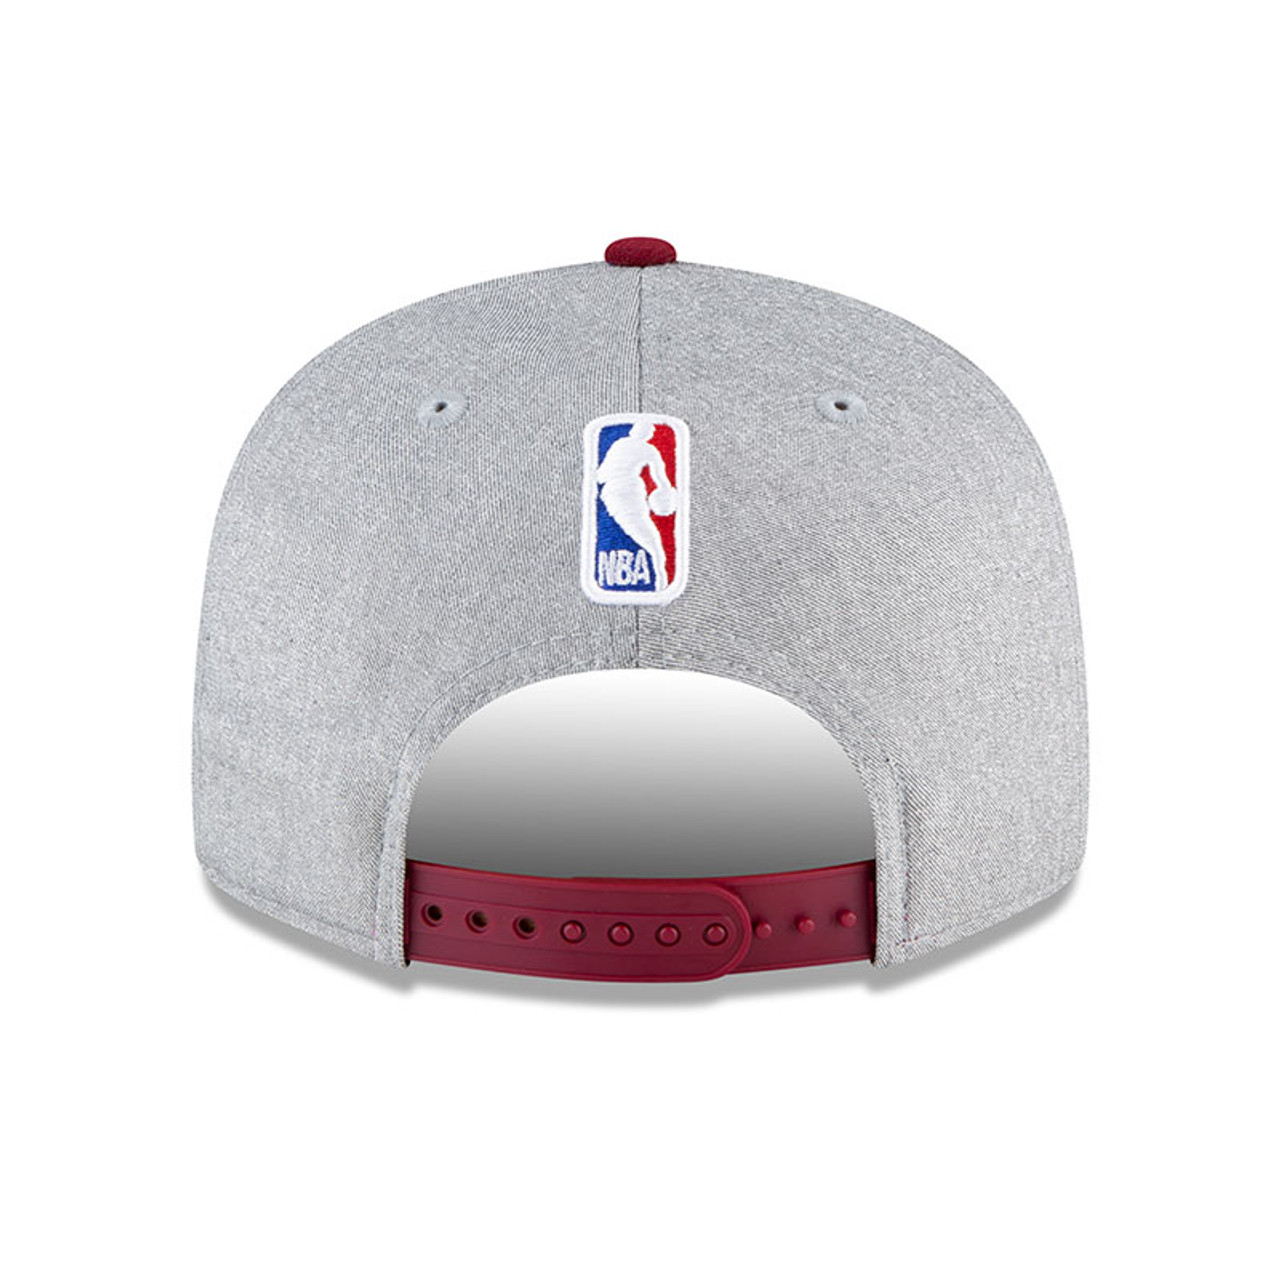 2020 Official Draft Snapback Hat | Cleveland Cavaliers Team Shop